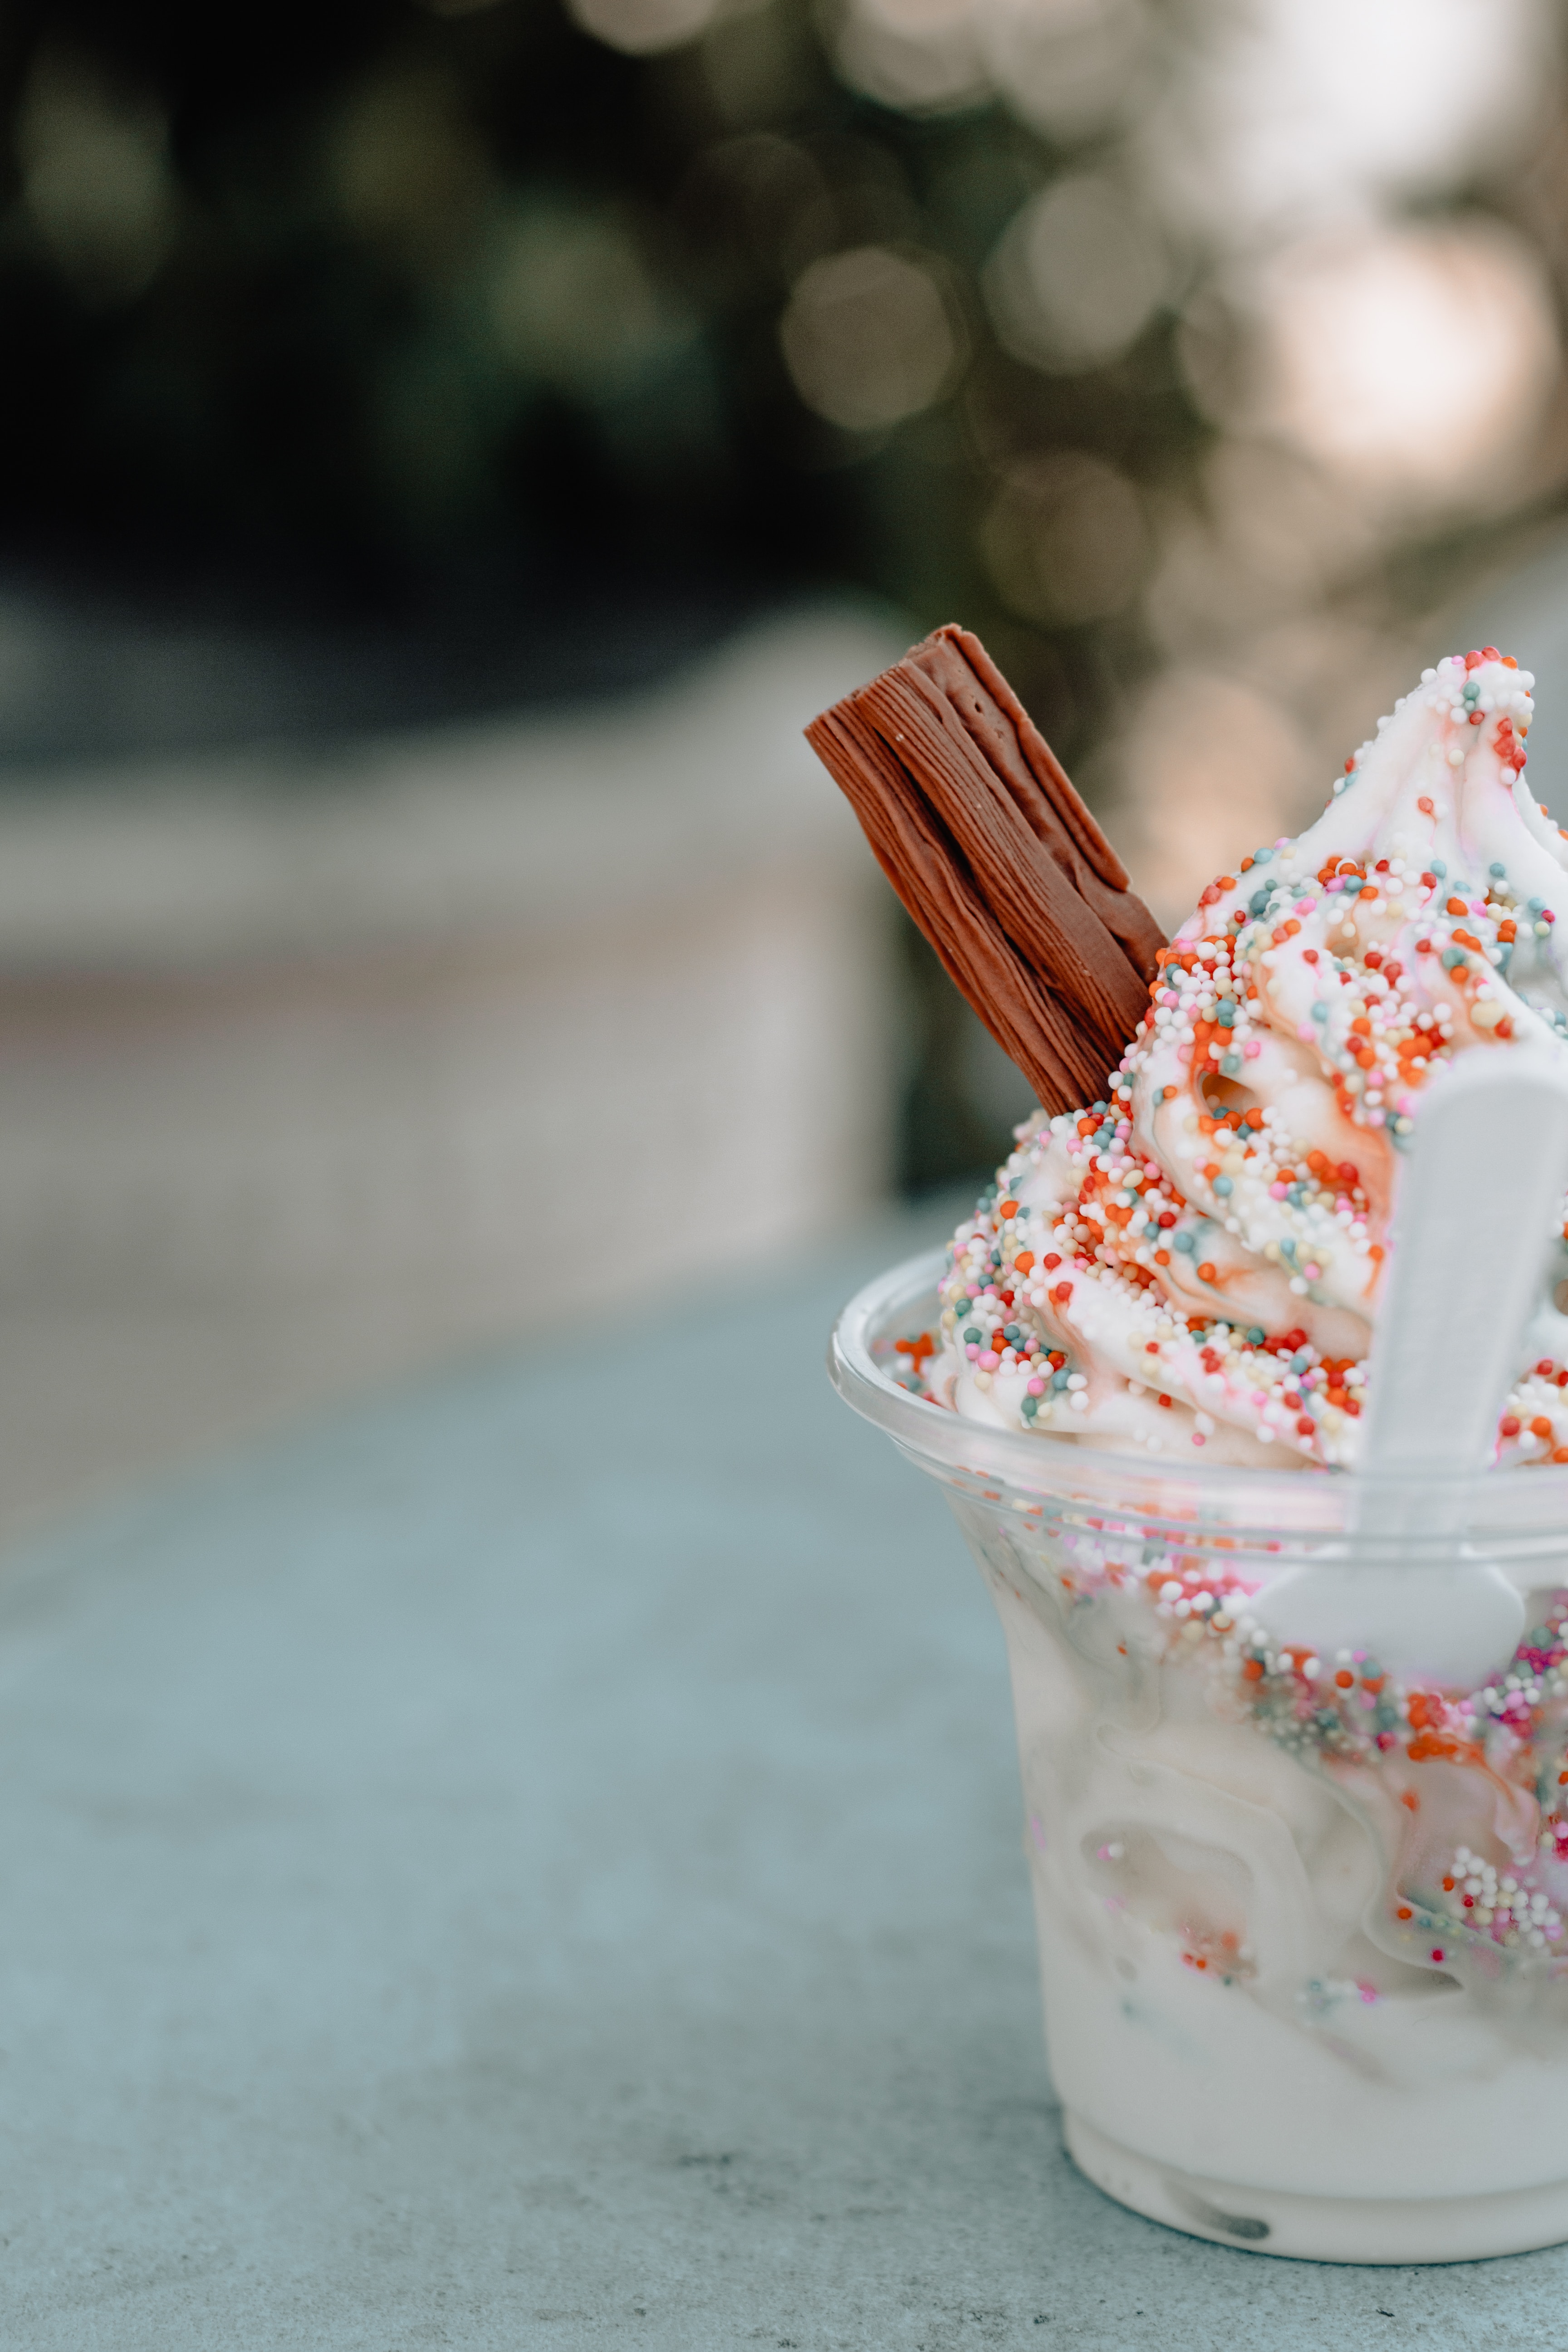 108404 download wallpaper food, desert, ice cream, sweet, sprinkling, sprinkle screensavers and pictures for free